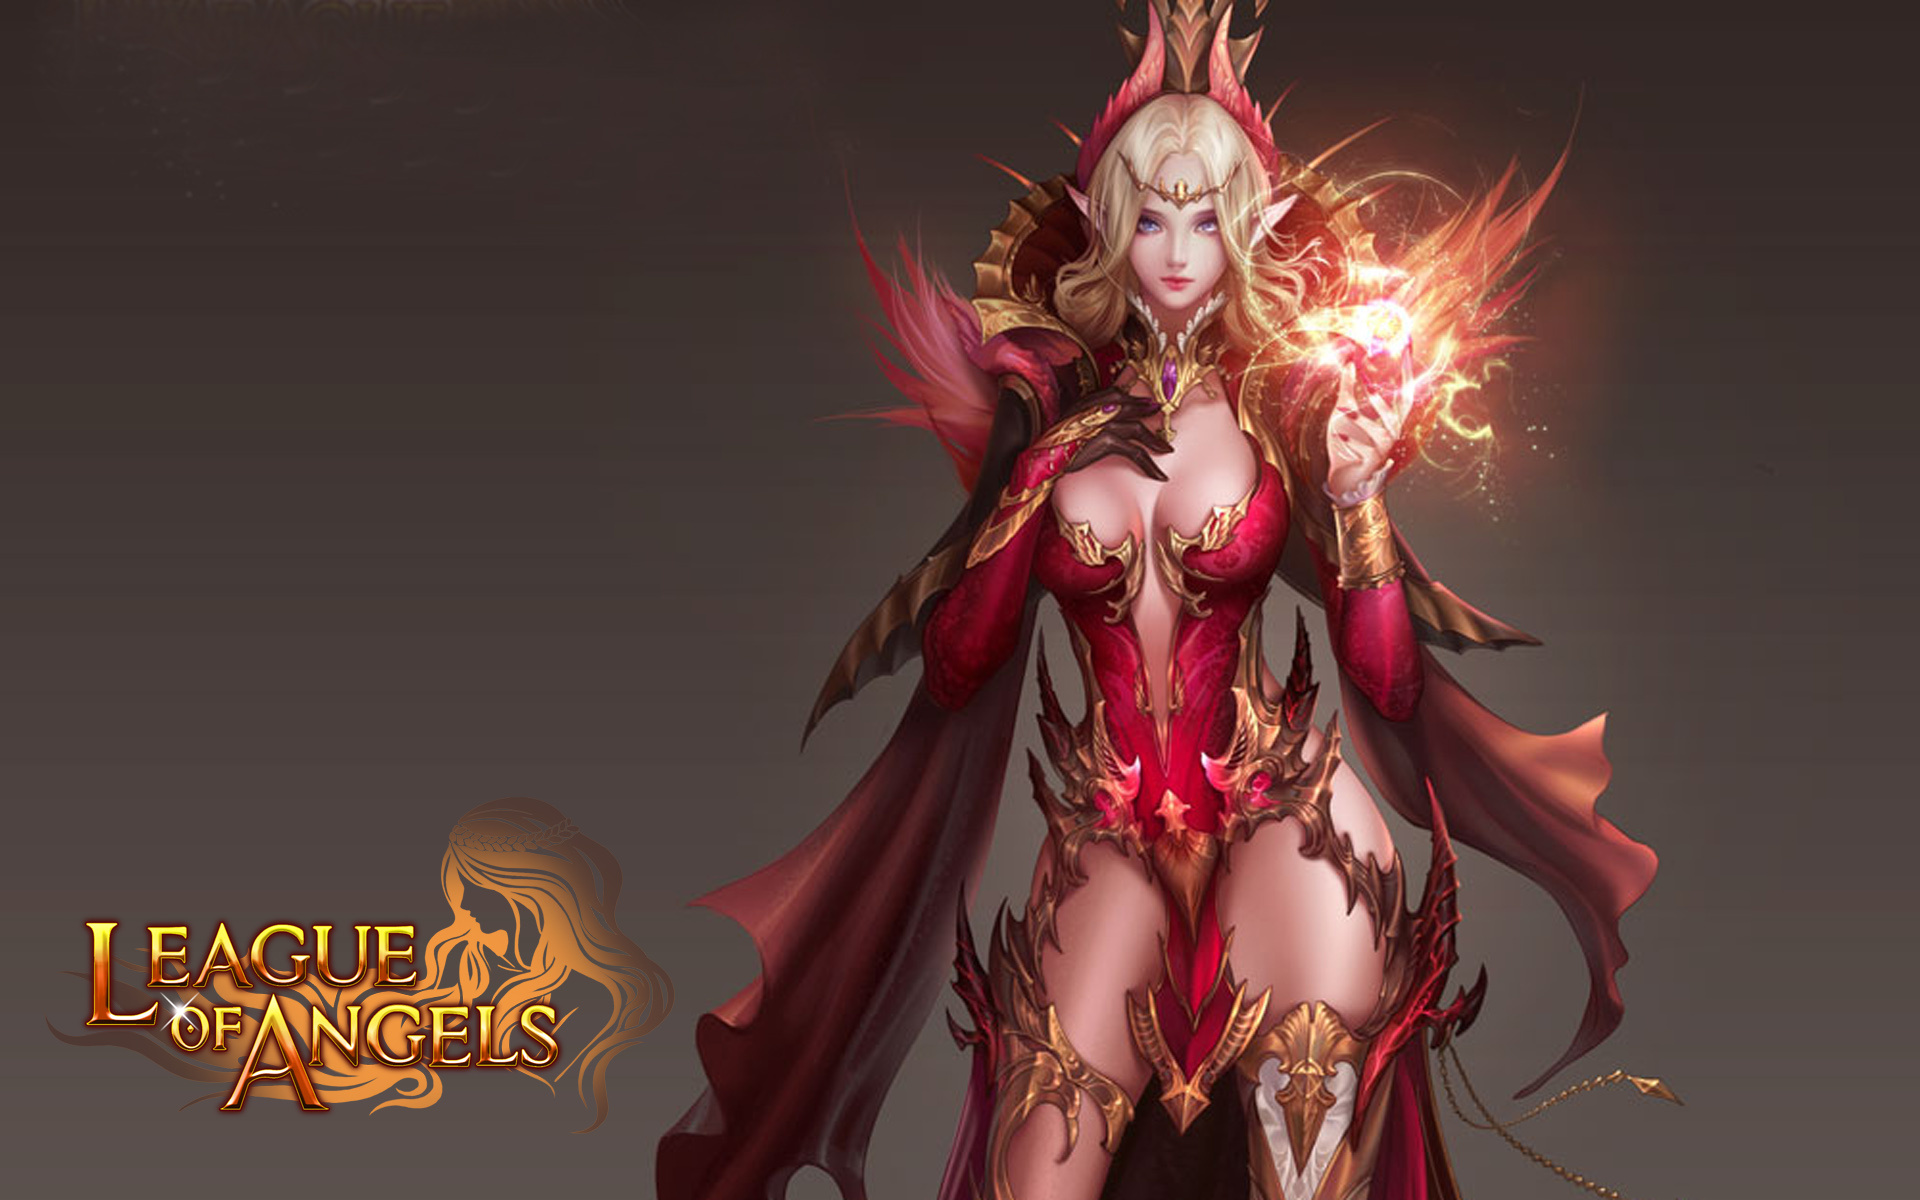 League of Angels, posted by sarah anderson, fanmade wallpapers, angelic artwork, 1920x1200 HD Desktop